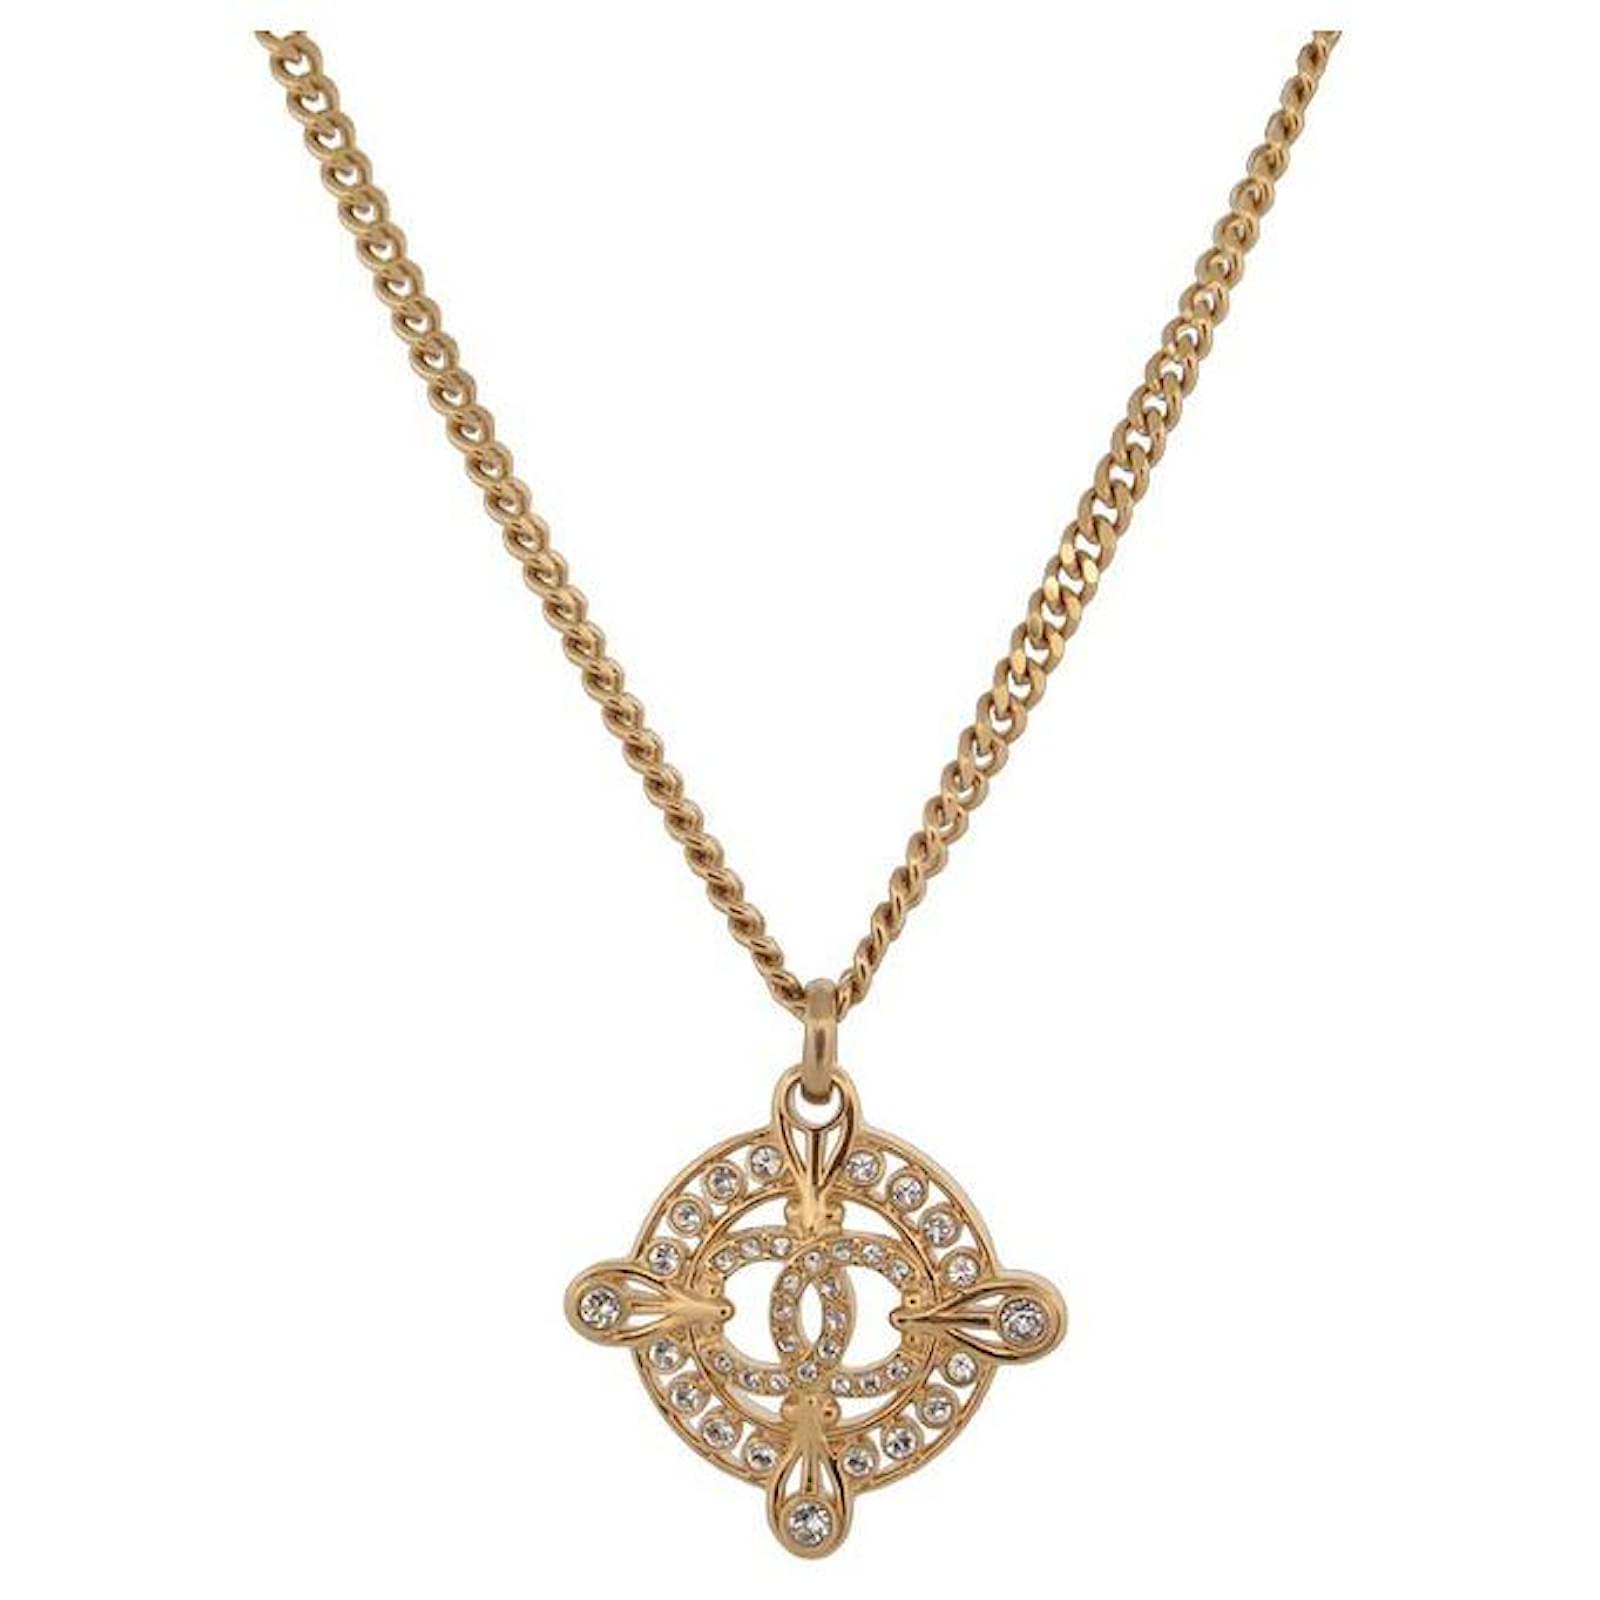 Necklaces Chanel New Chanel Necklace CC Logo Pendant Strass Gold Metal 43/50 Necklace